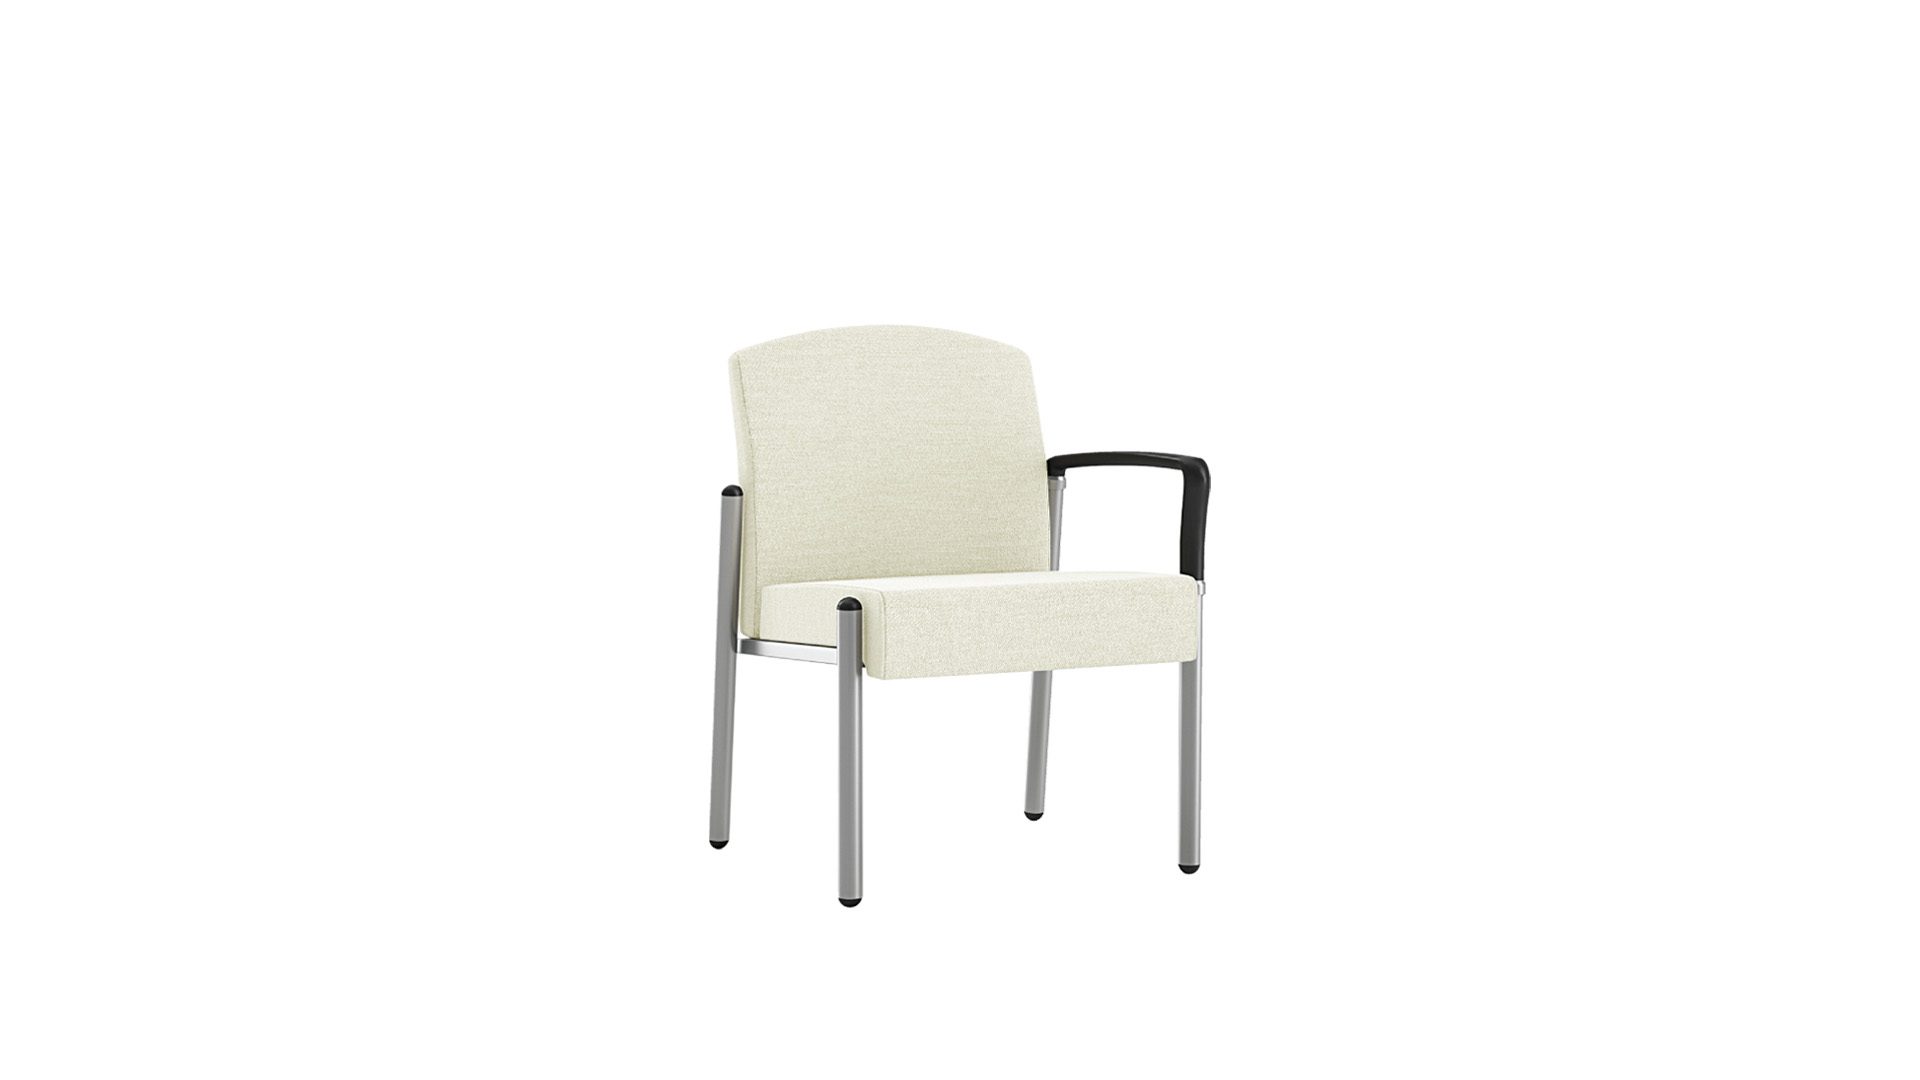 NTG110-LA Integrity Guest Chair with left arm only and 21" seat